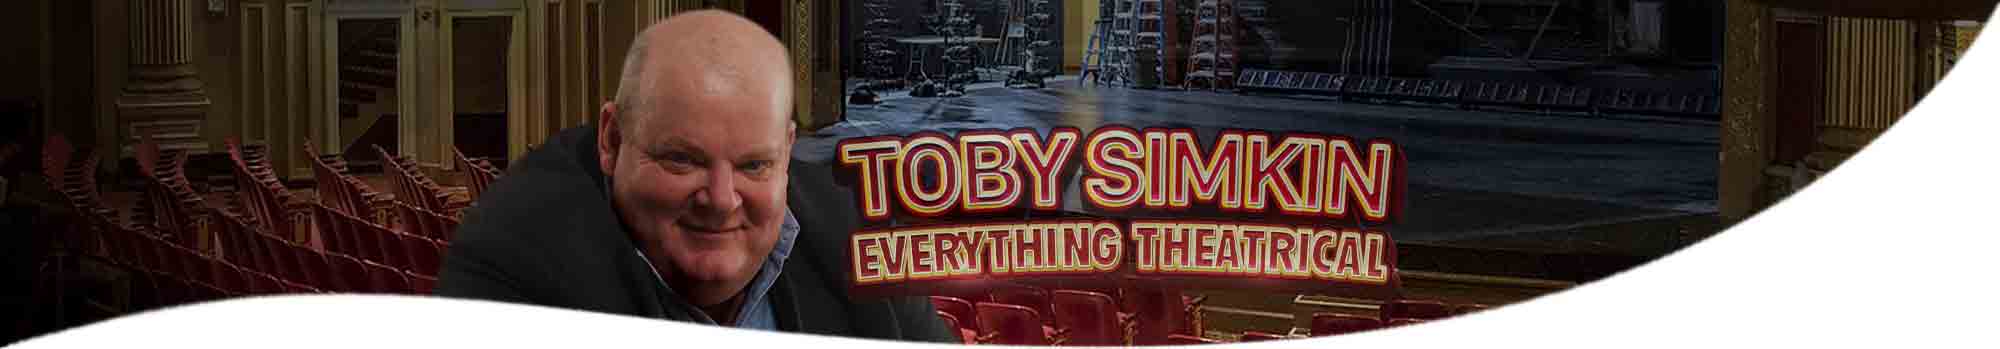 Toby Simkin Broadway Theatre Producer and Live Entertainment Executive